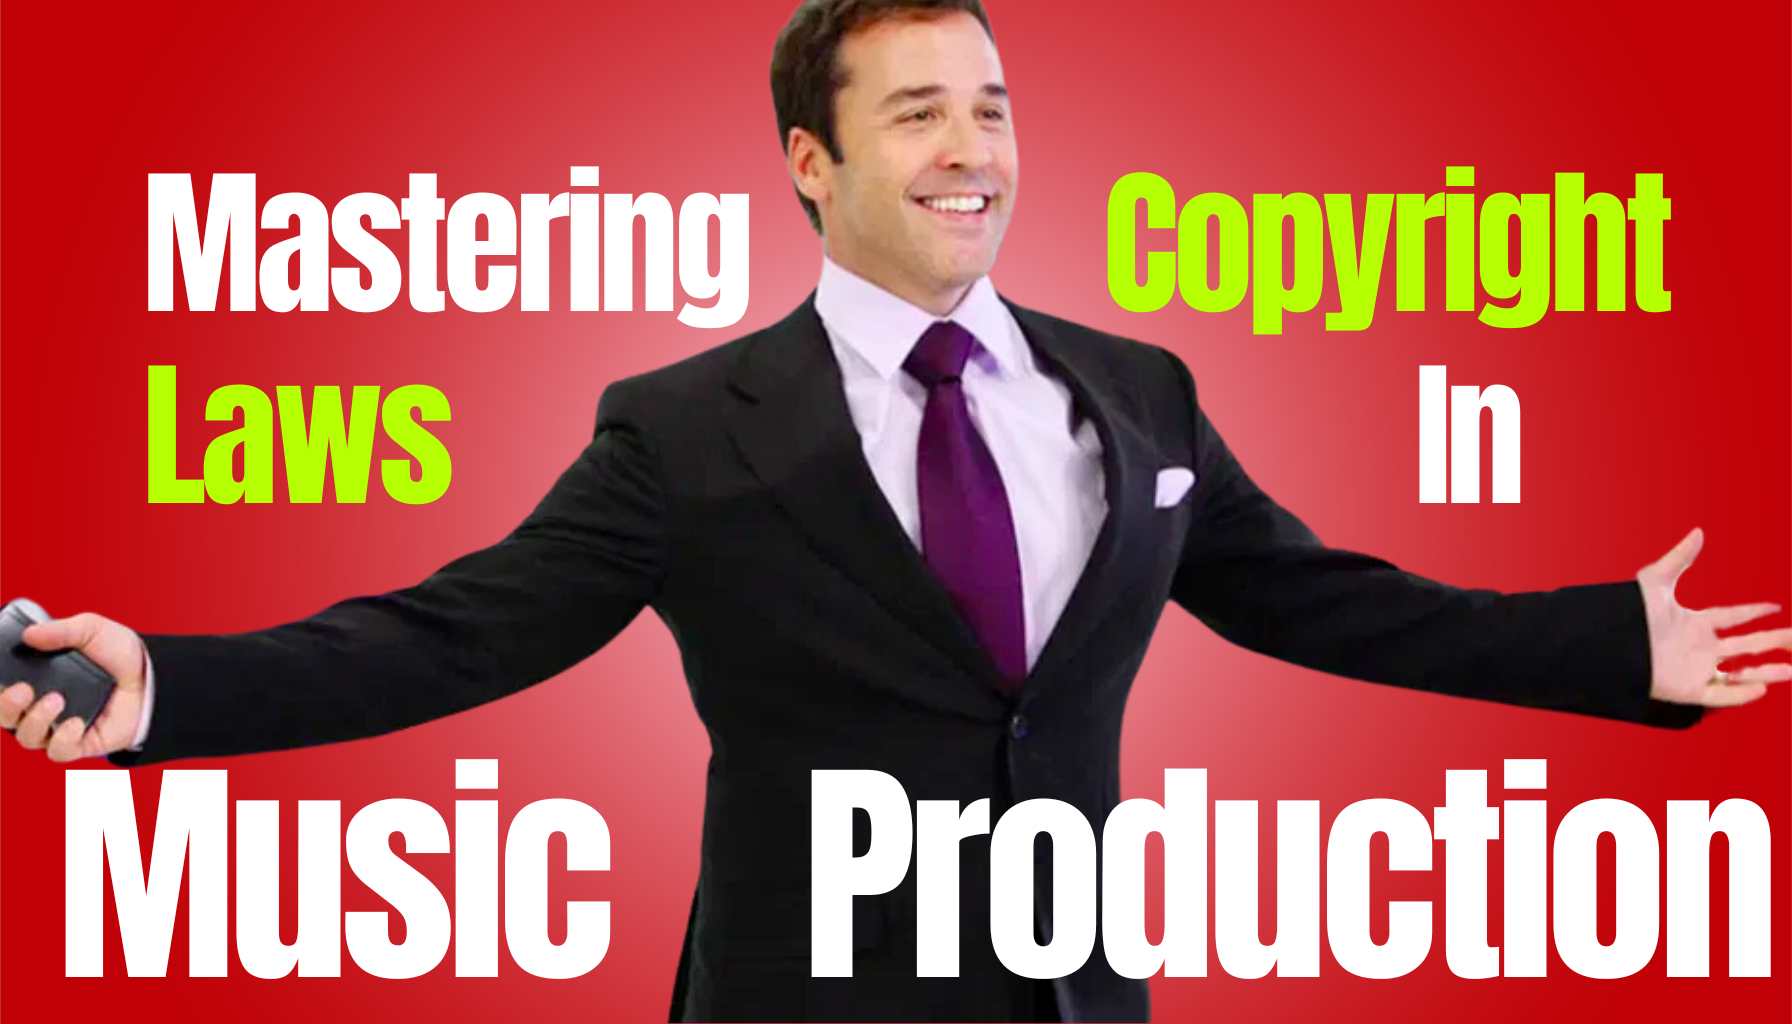 Ari Gold of Entourage, the master agent, argues a legal music rights case in the image